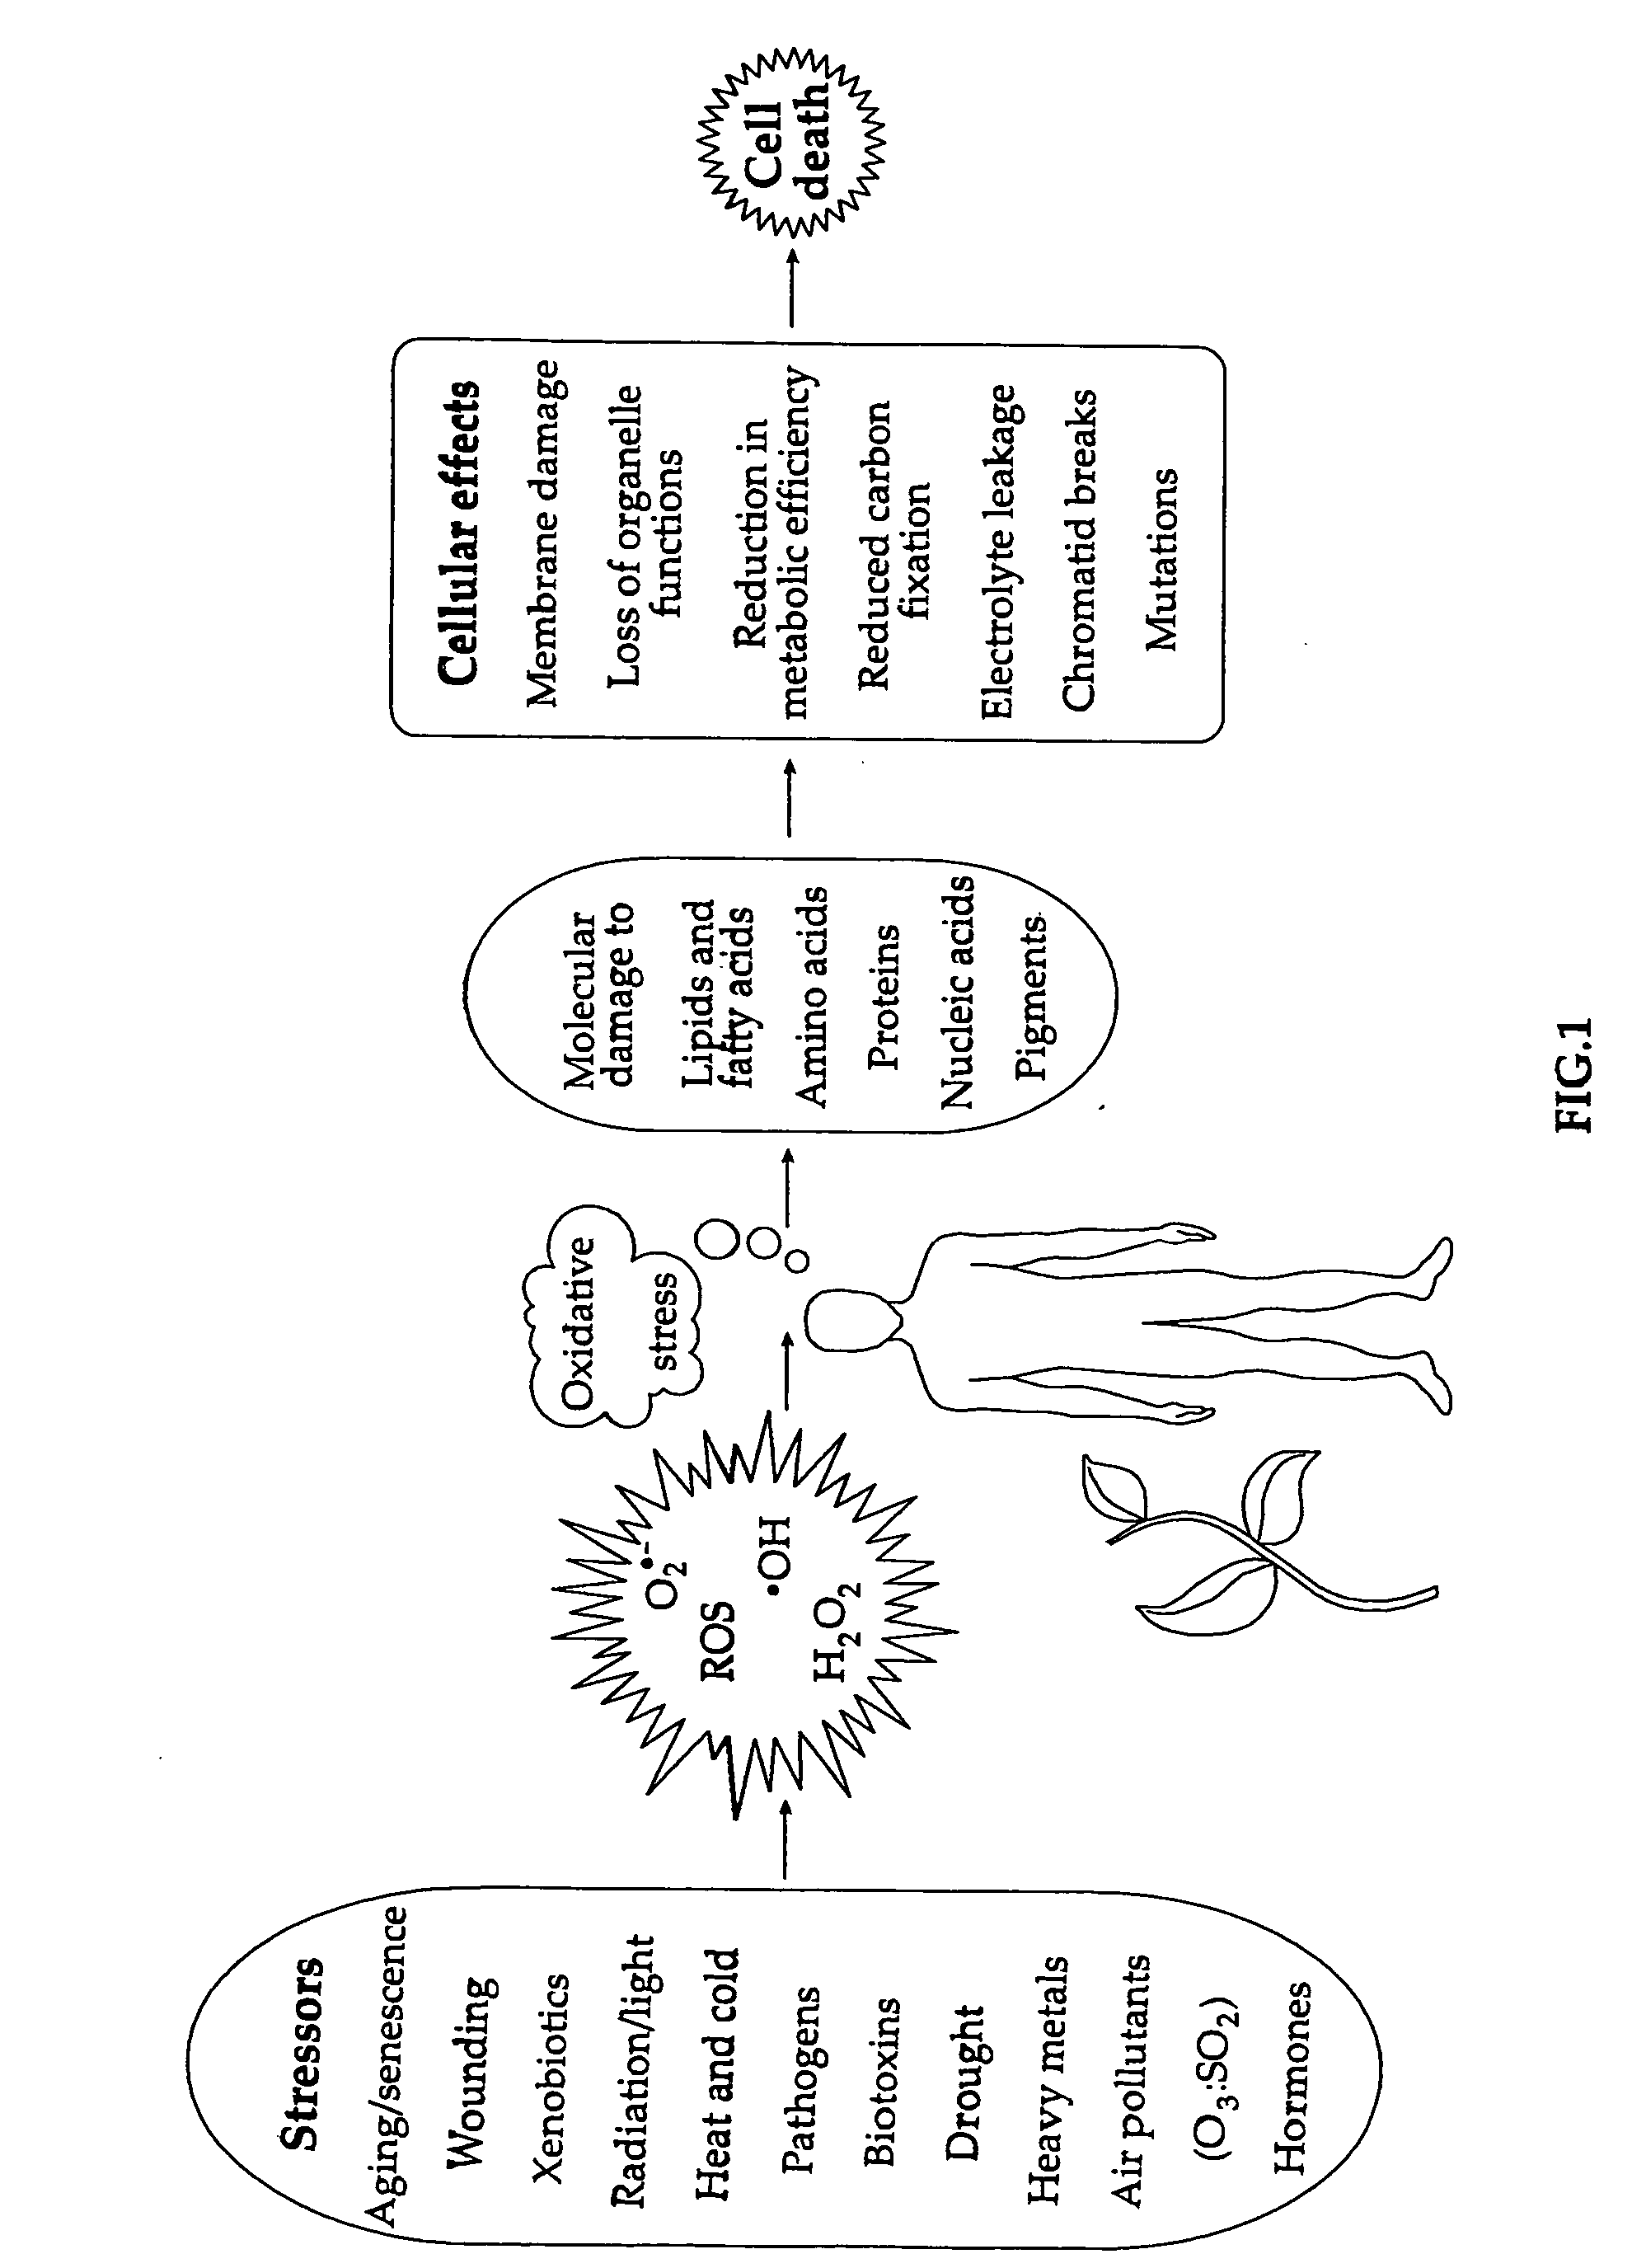 Population of cells utilizable for substance detection and methods and devices using same